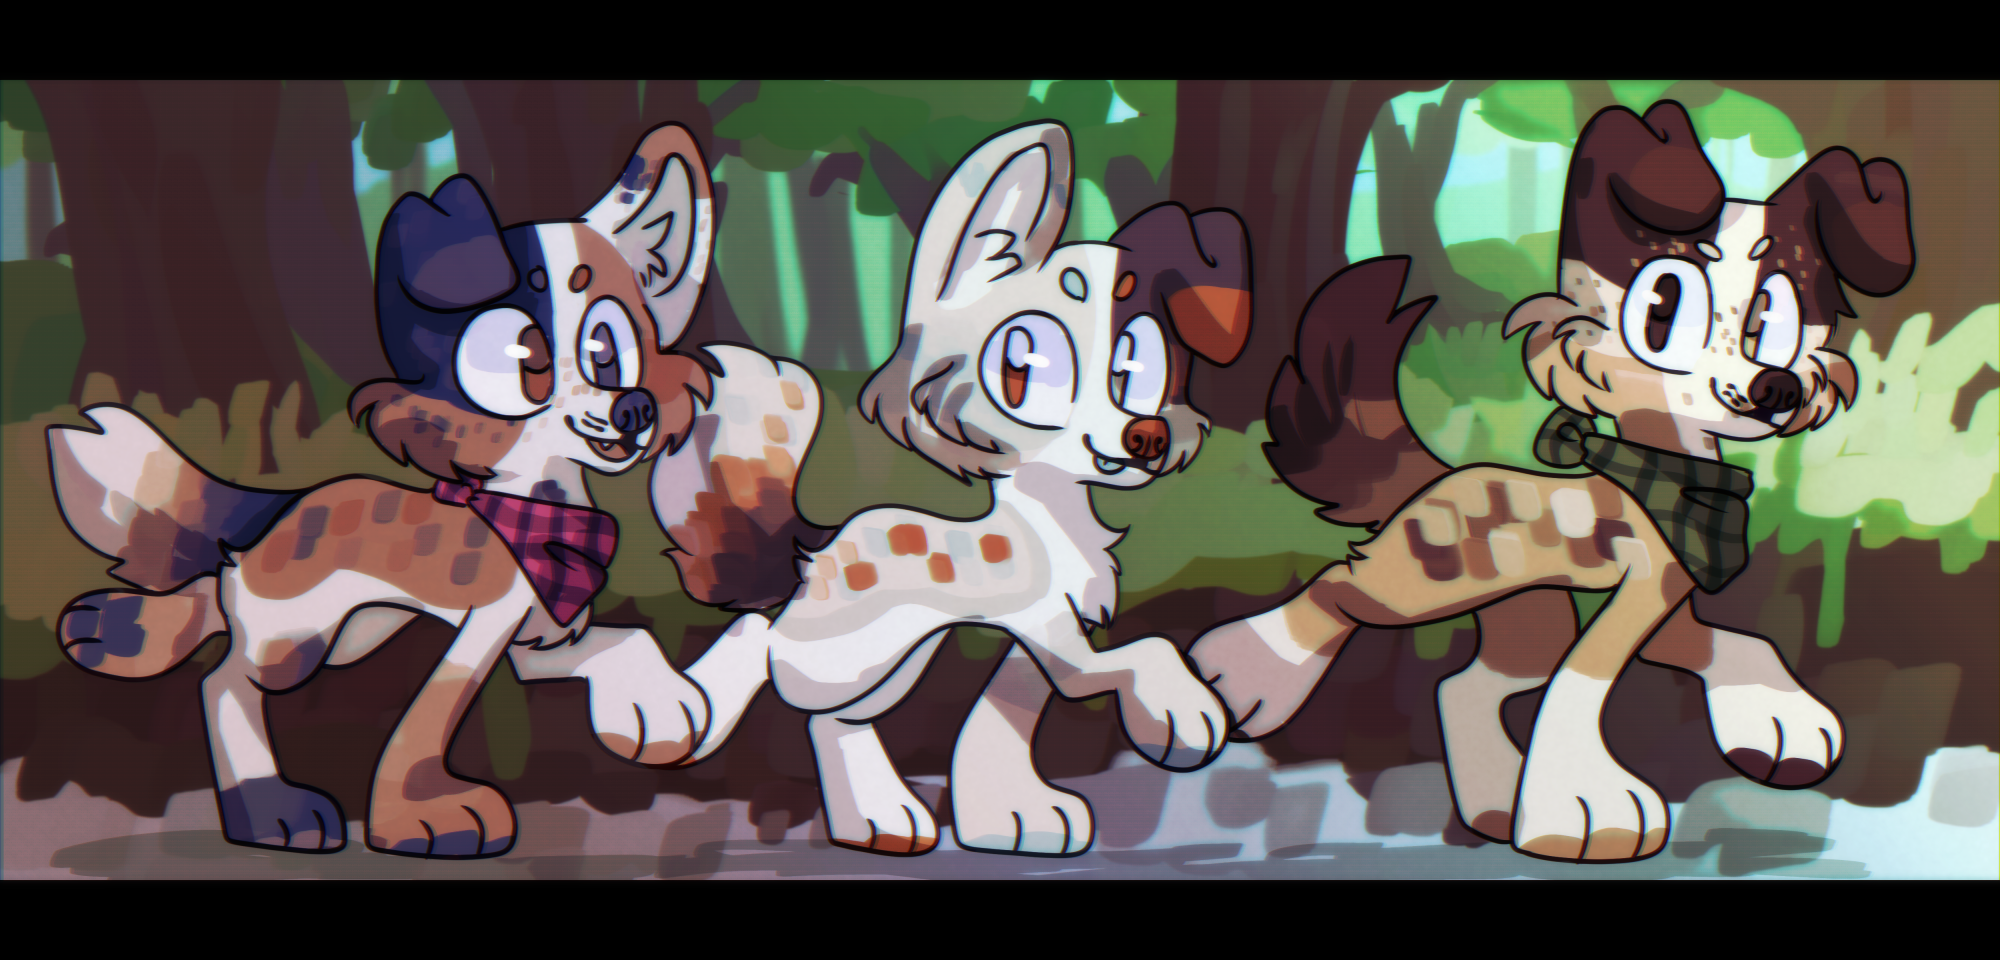 a drawing of 3 cartoon dogs of various colors walking through a forest. There is a heavy vhs / tv overlay on the image.